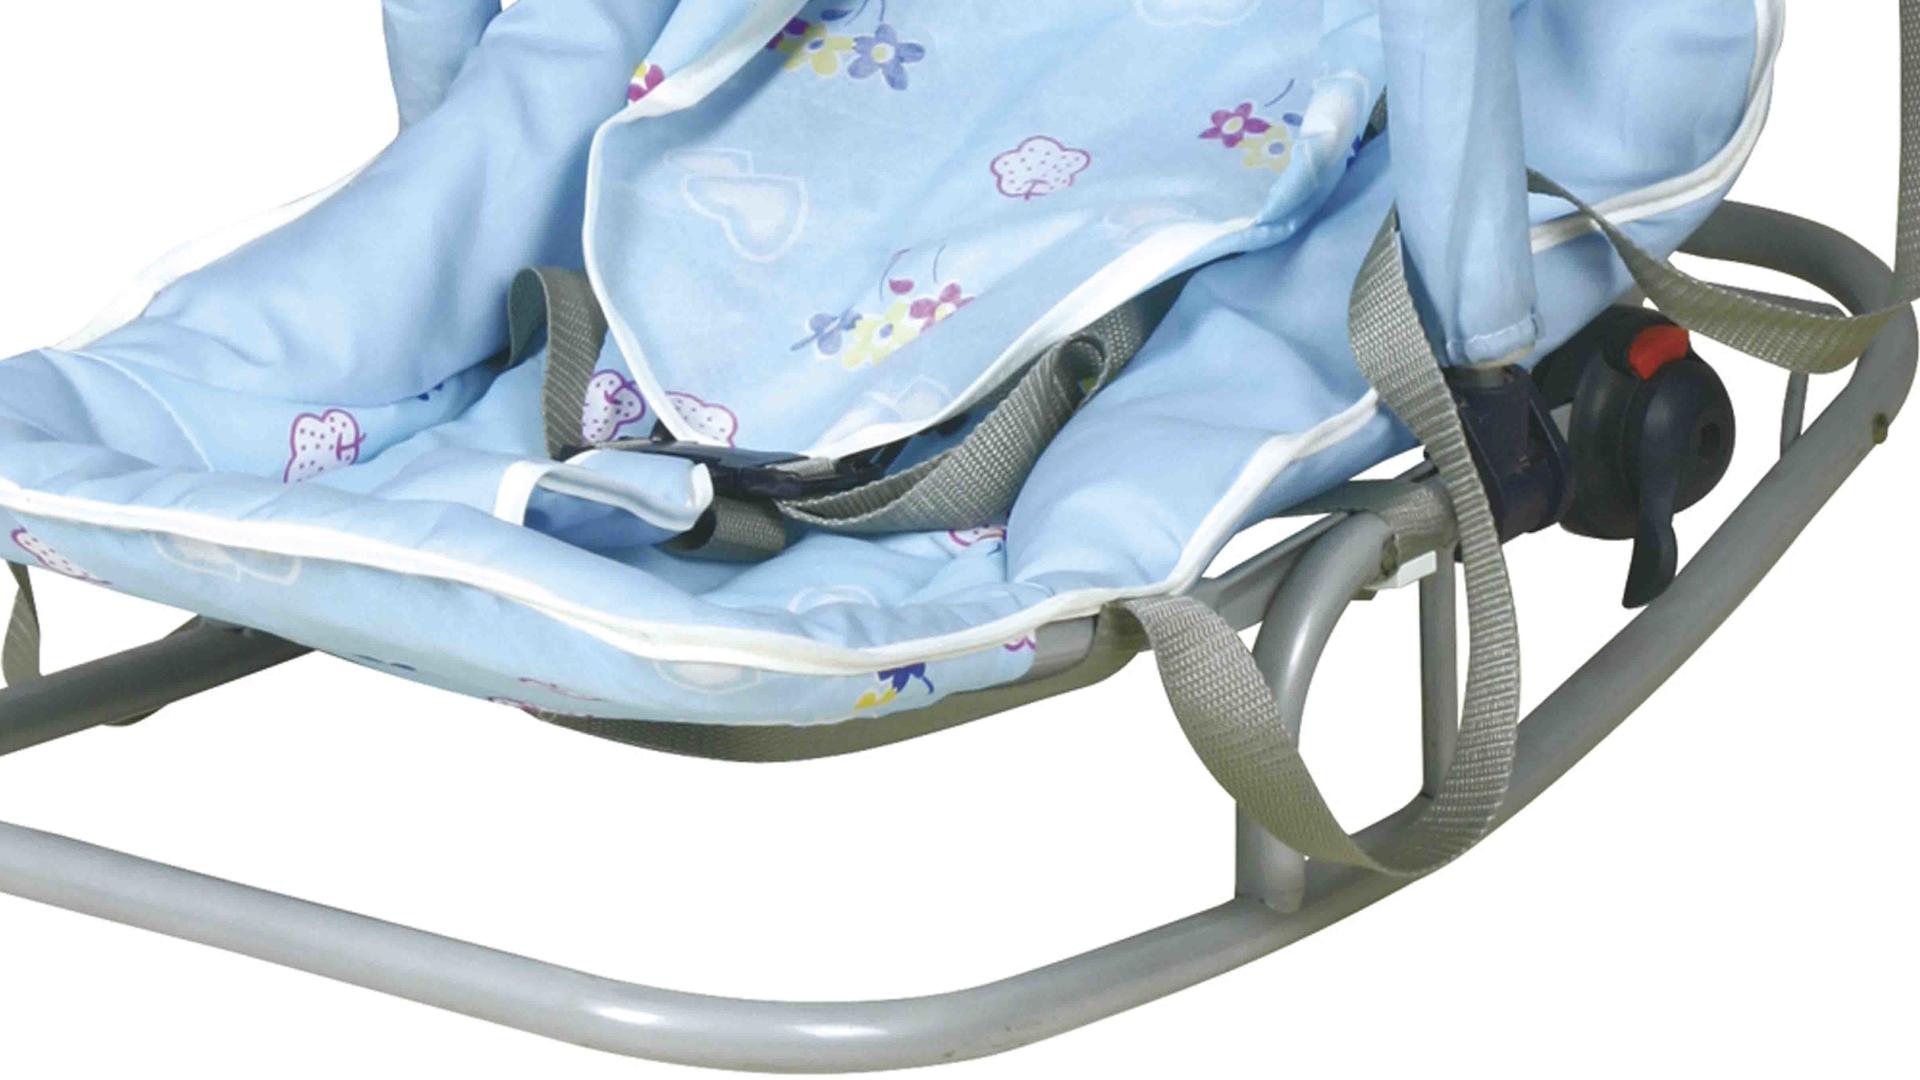 Aoqi foldable neutral baby bouncer factory price for home